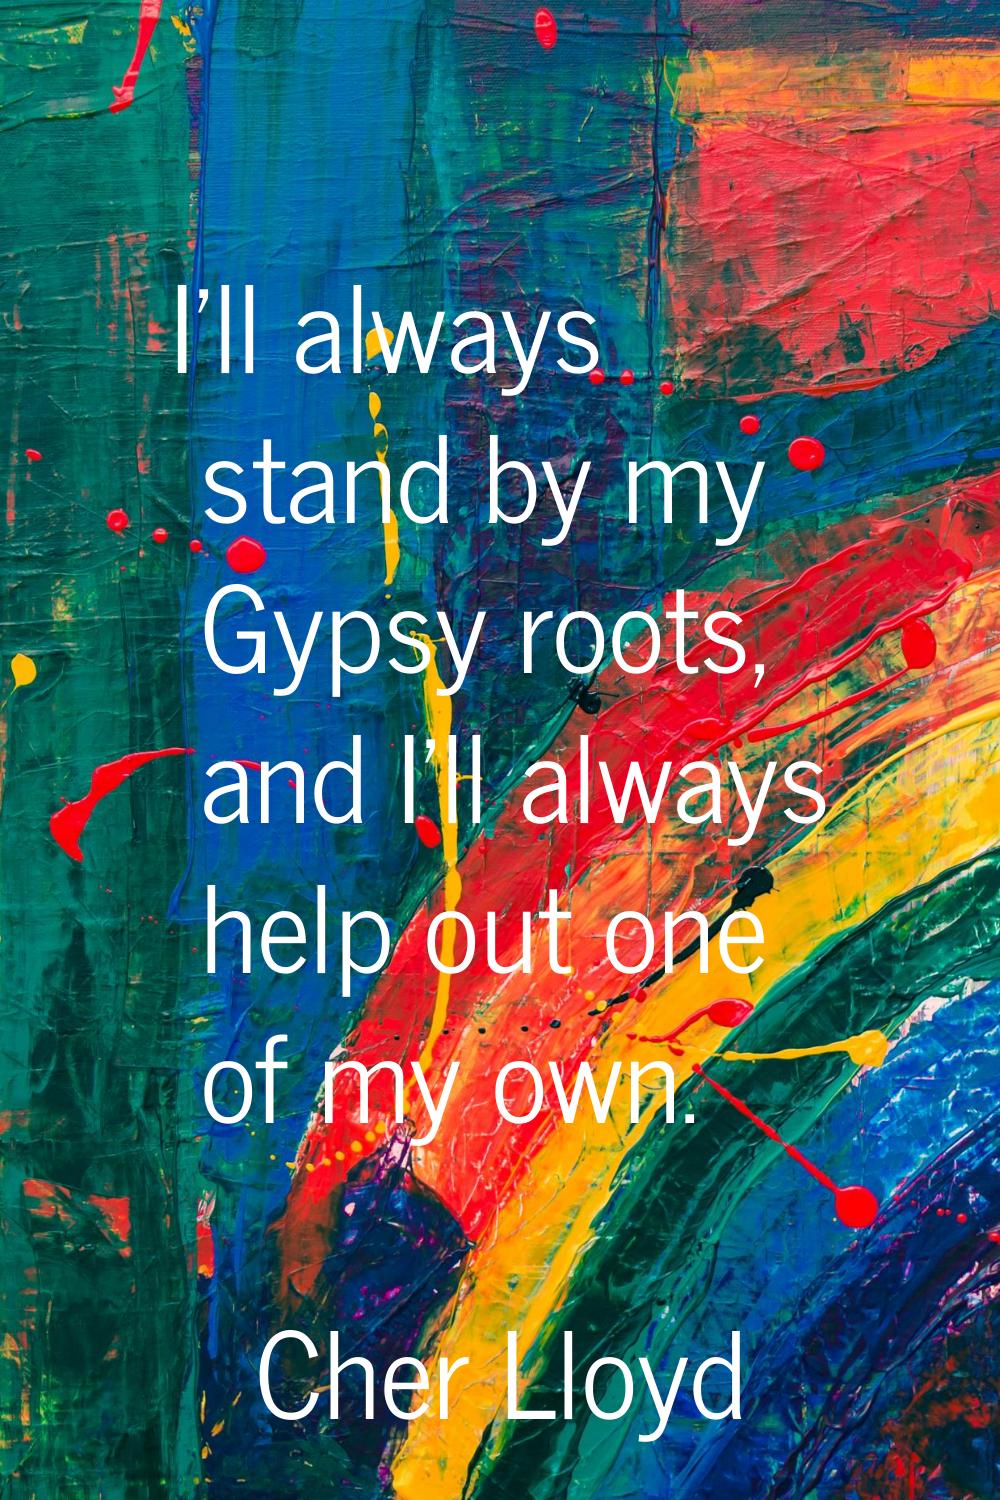 I'll always stand by my Gypsy roots, and I'll always help out one of my own.